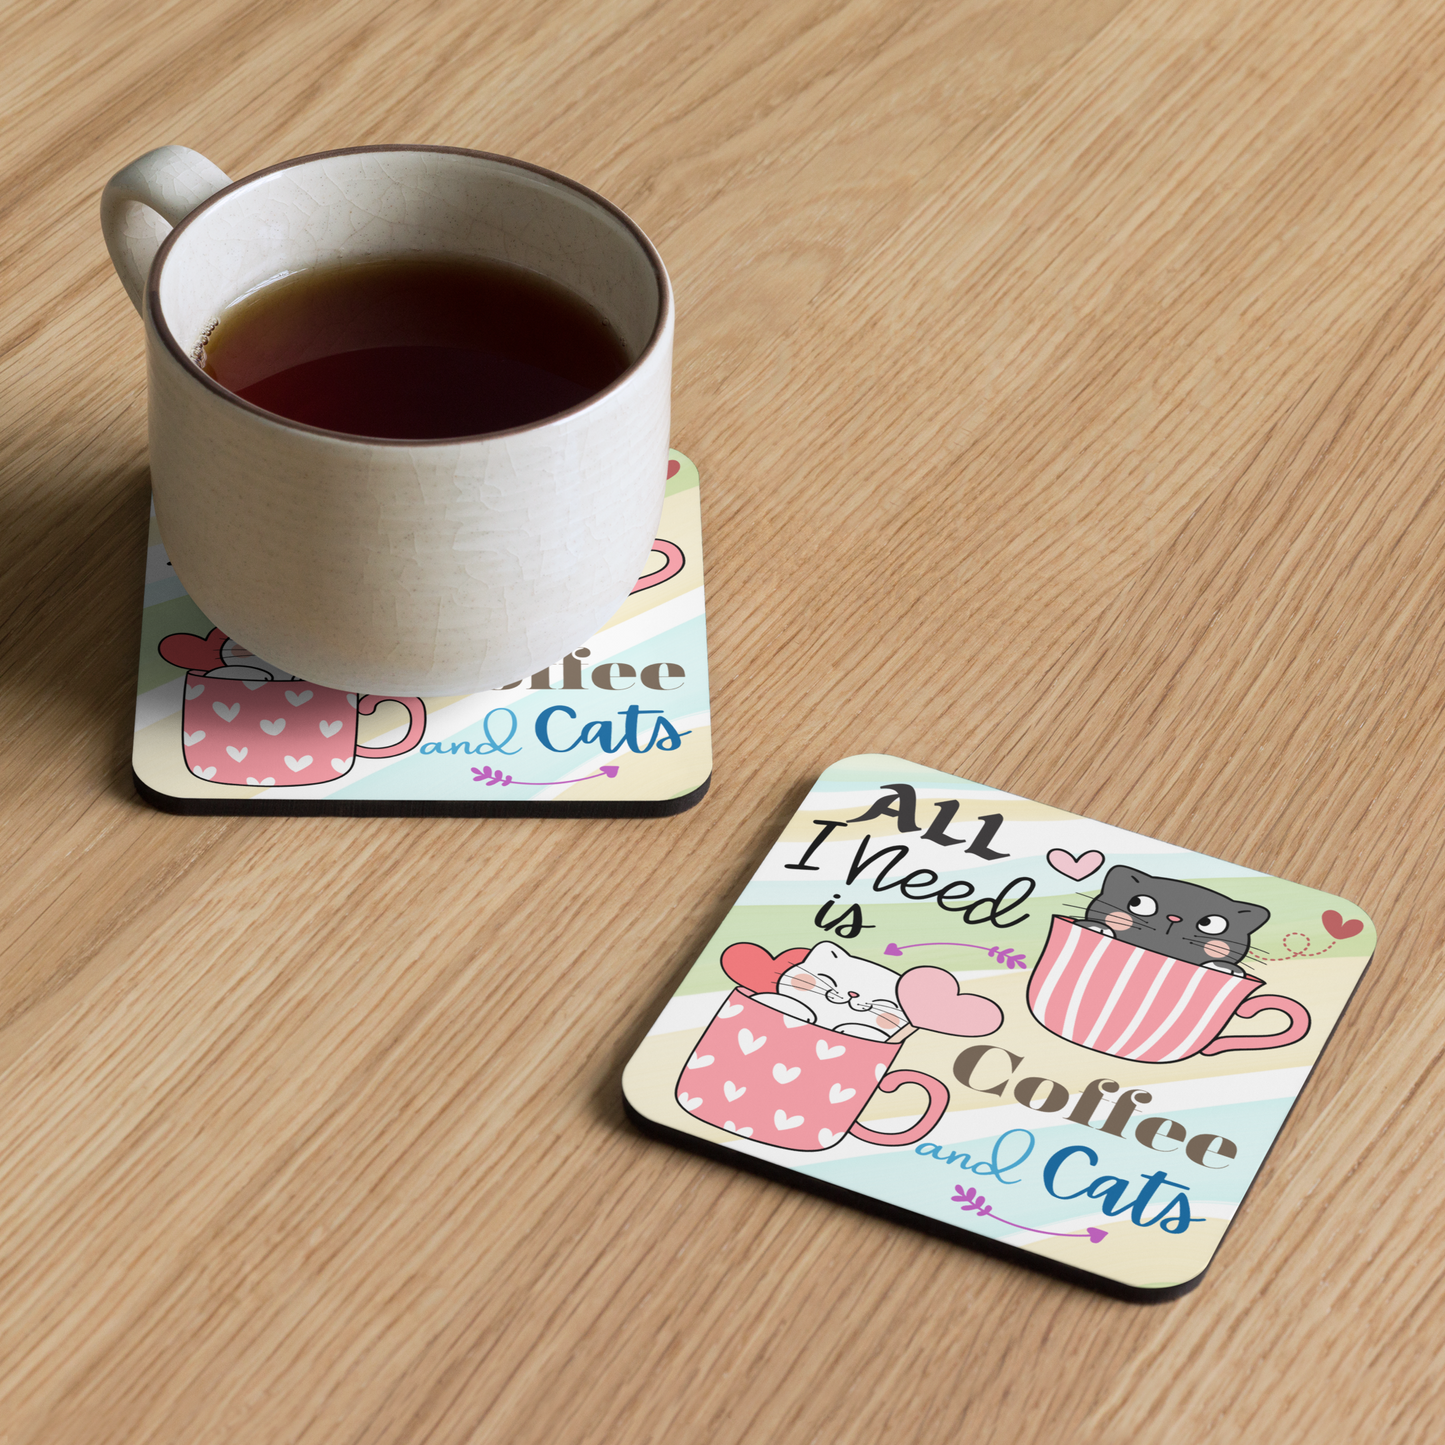 Cork-back coaster | Adorable All I Need is Coffee and Cats Themed